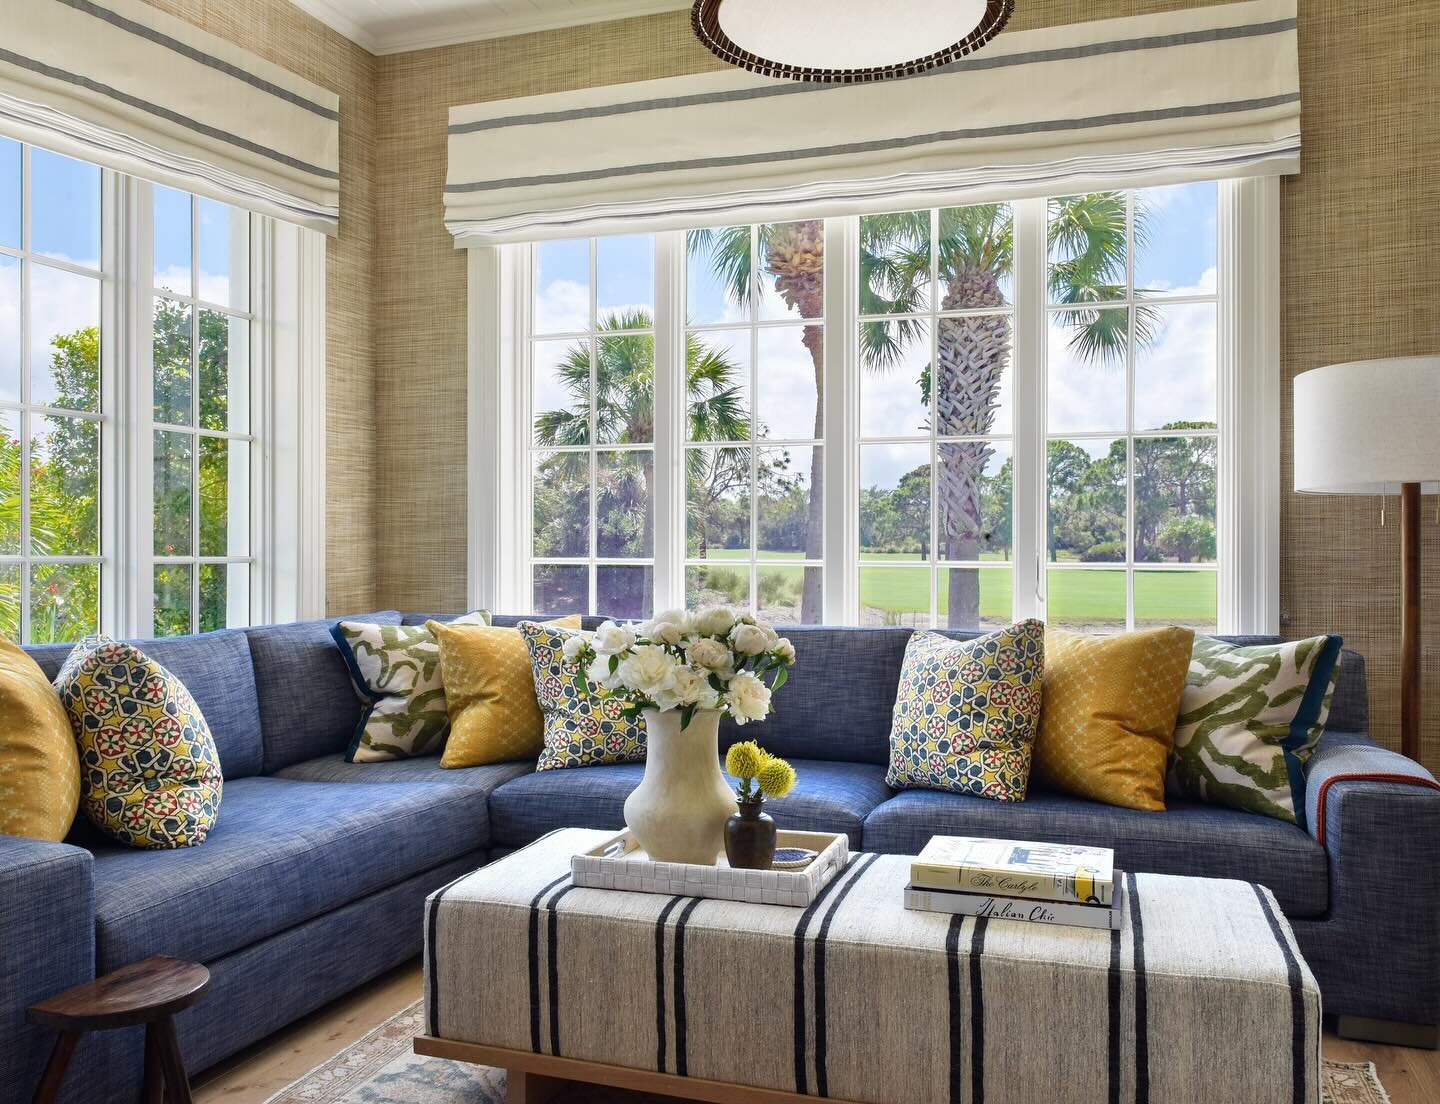 We call this room the &ldquo;snuggery&rdquo;! Our favorite space in our Palm Beach Country project. 

Photo by @kenhaydenphotography